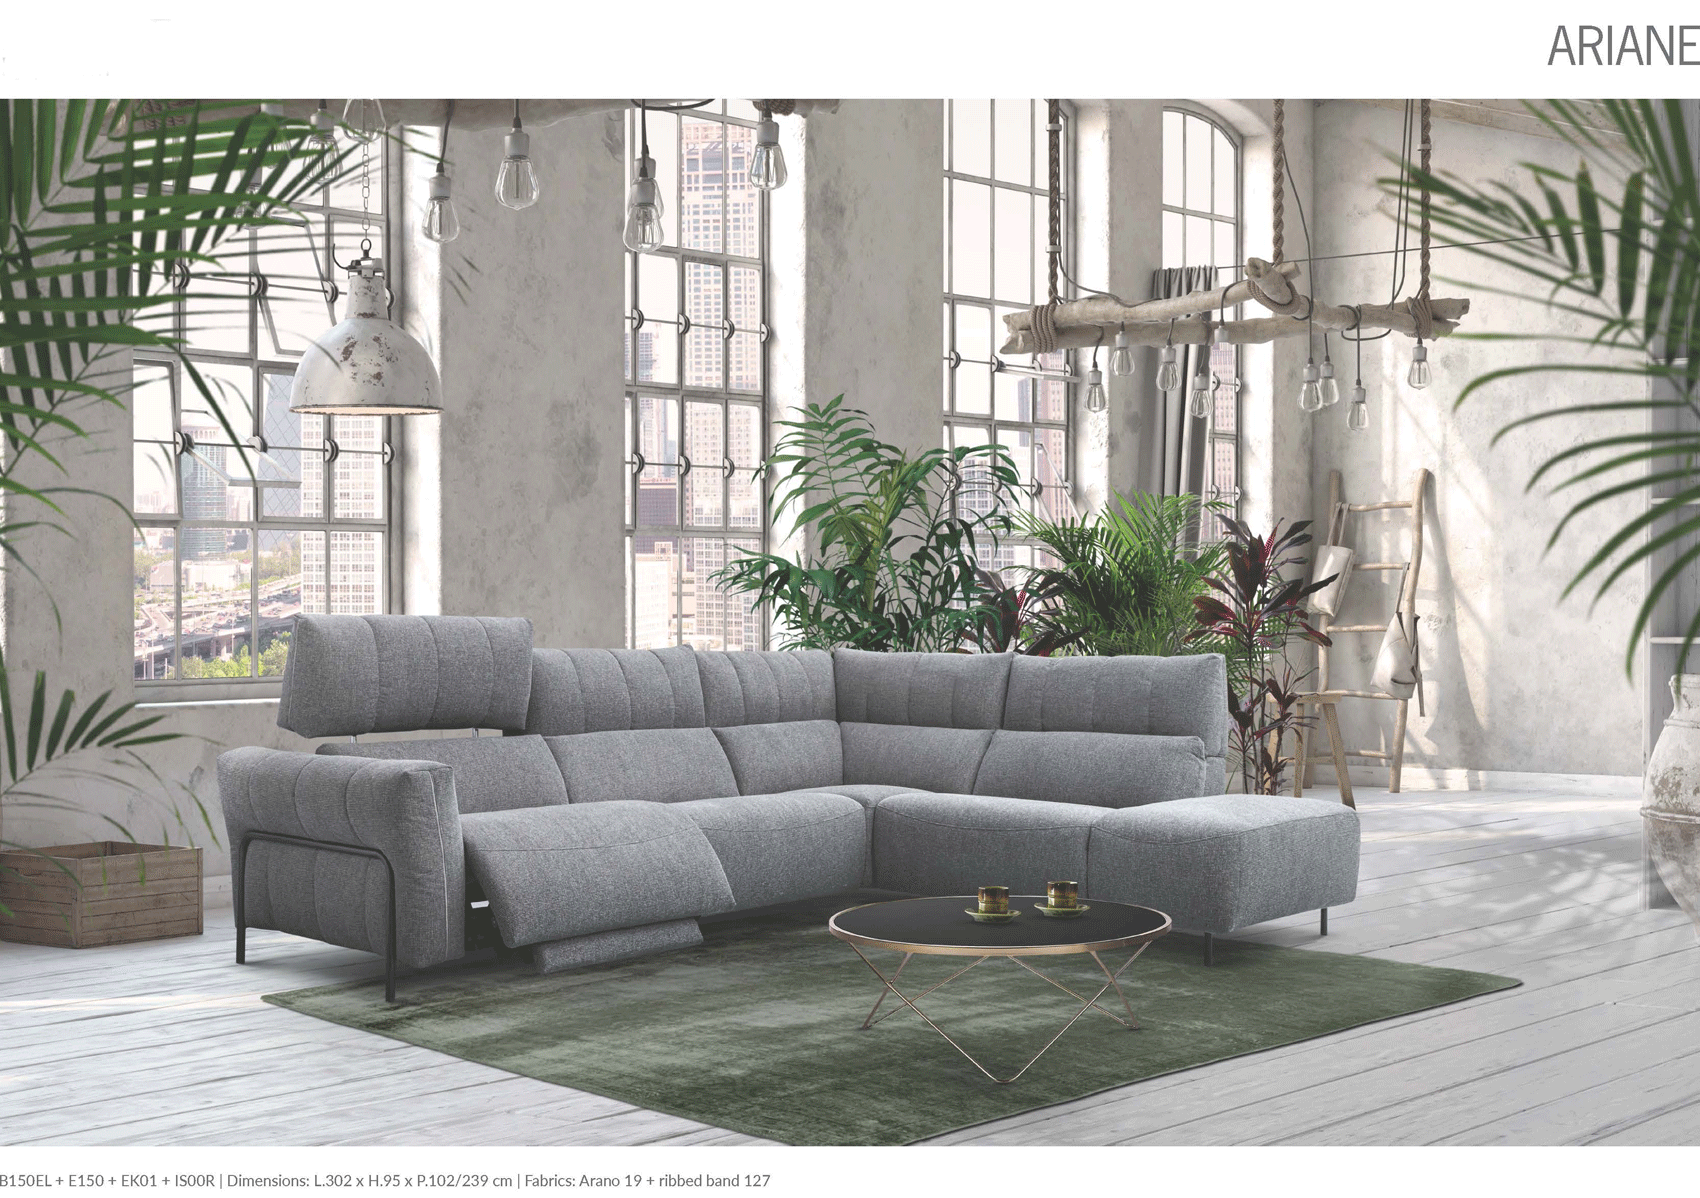 Brands European Living Collection Ariane Sectional